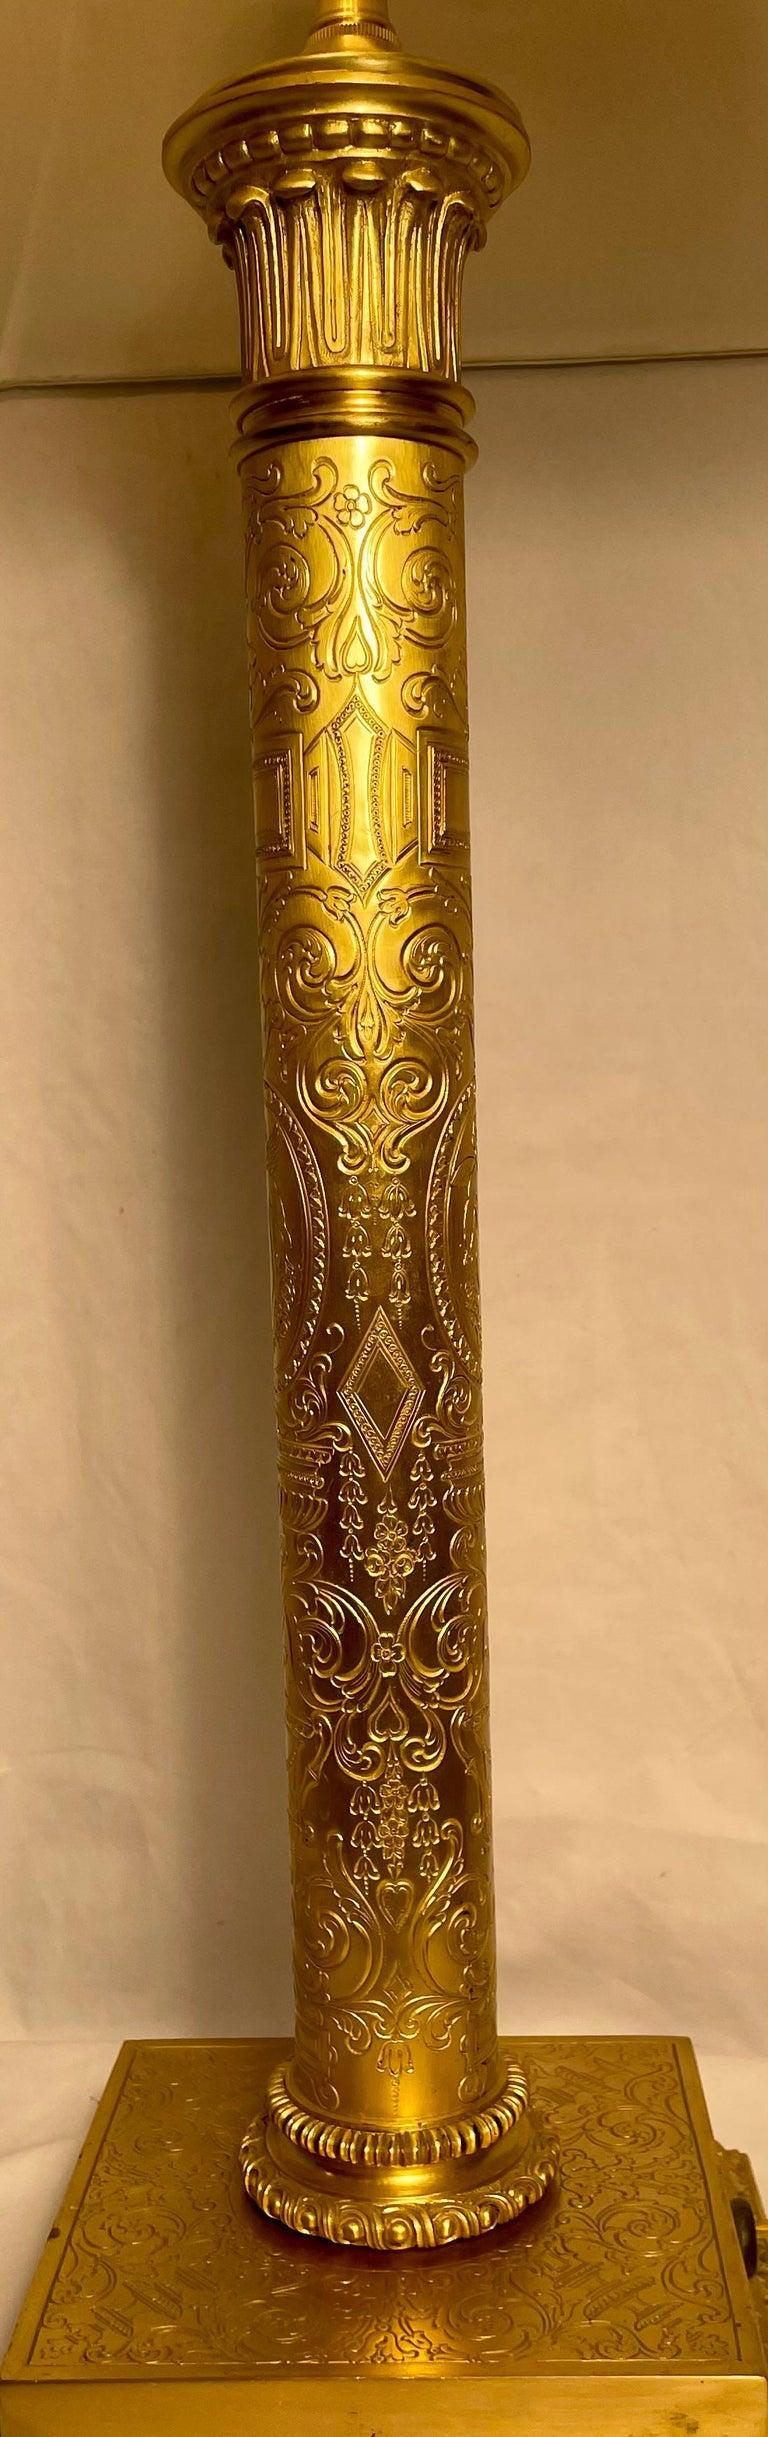 American Antique Ormolu Lamp with Detailed Etching on Column by 